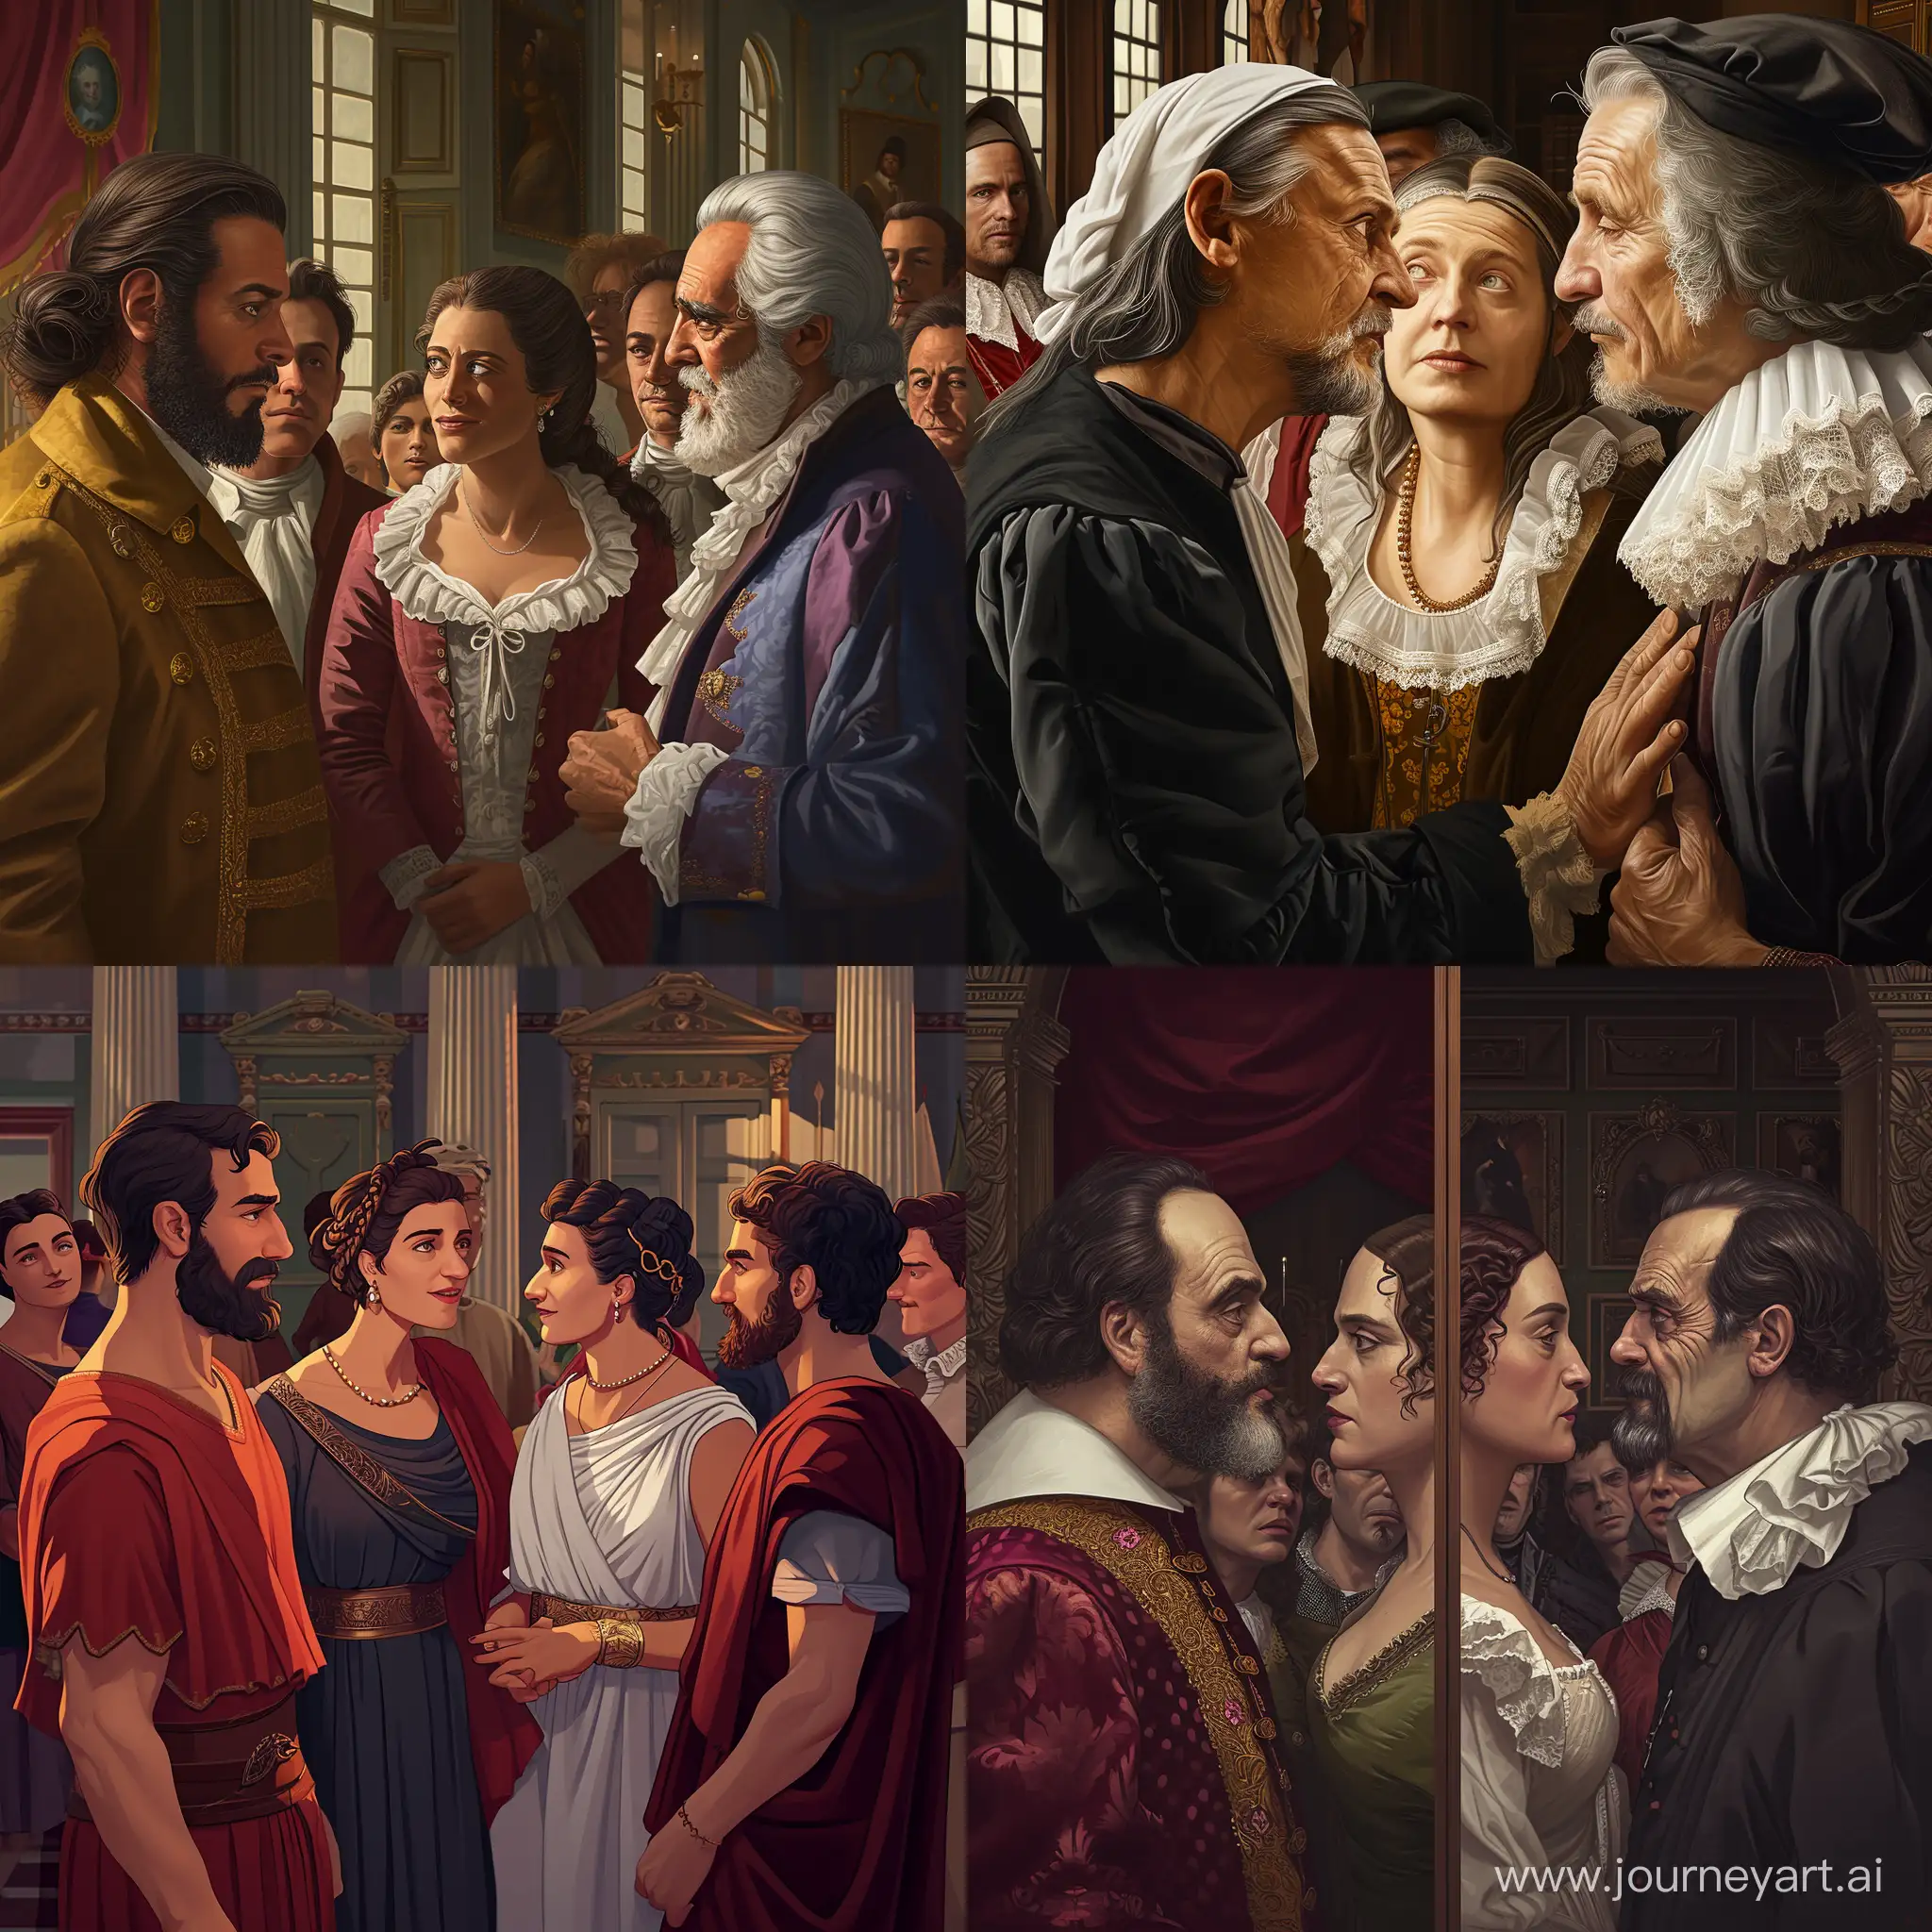 Historical-Figure-Dating-Dilemma-A-Photorealistic-Scene-of-Quirks-and-Challenges